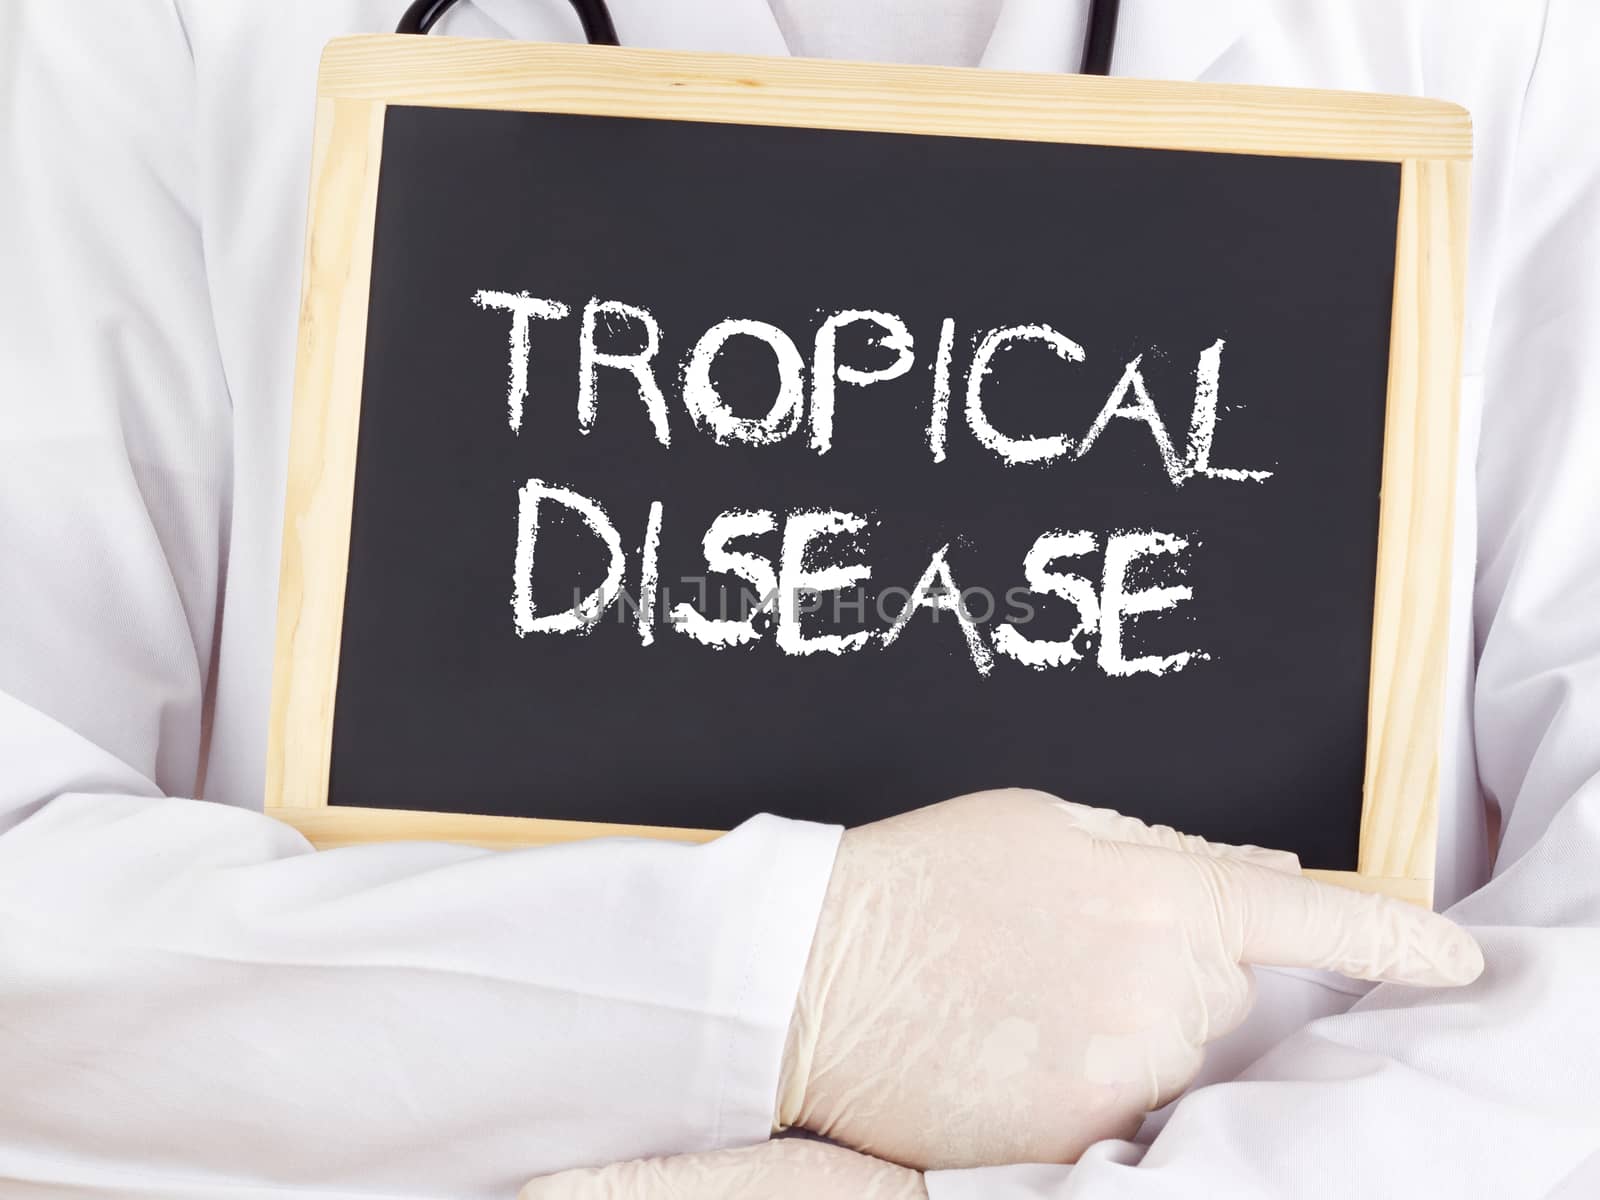 Doctor shows information on blackboard: Tropical disease by gwolters